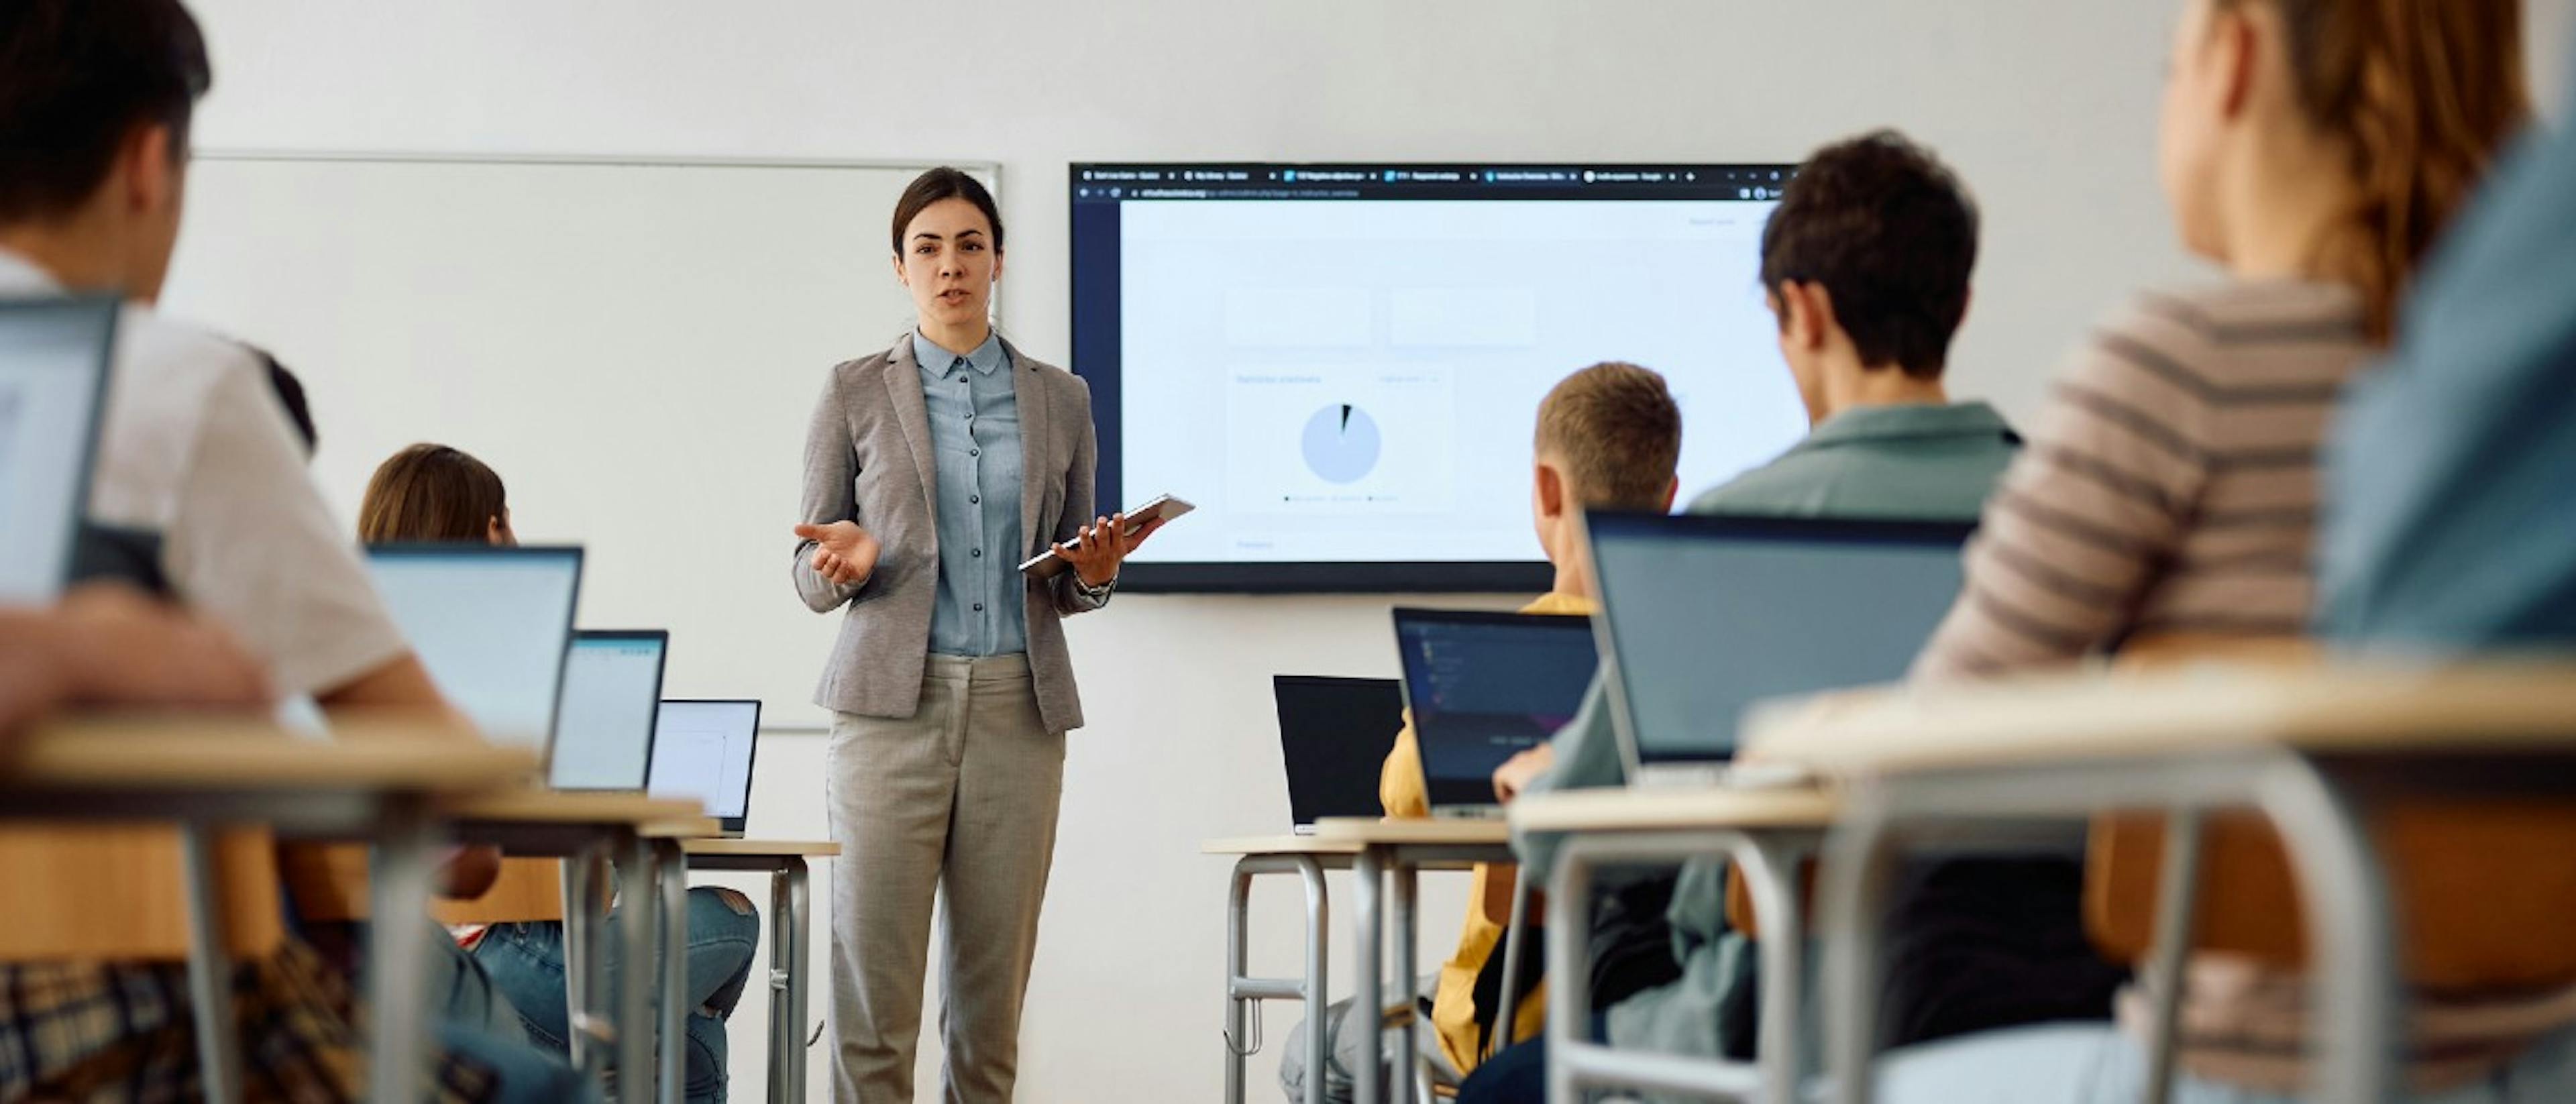 featured image - What Educators Need to Know About Cybersecurity